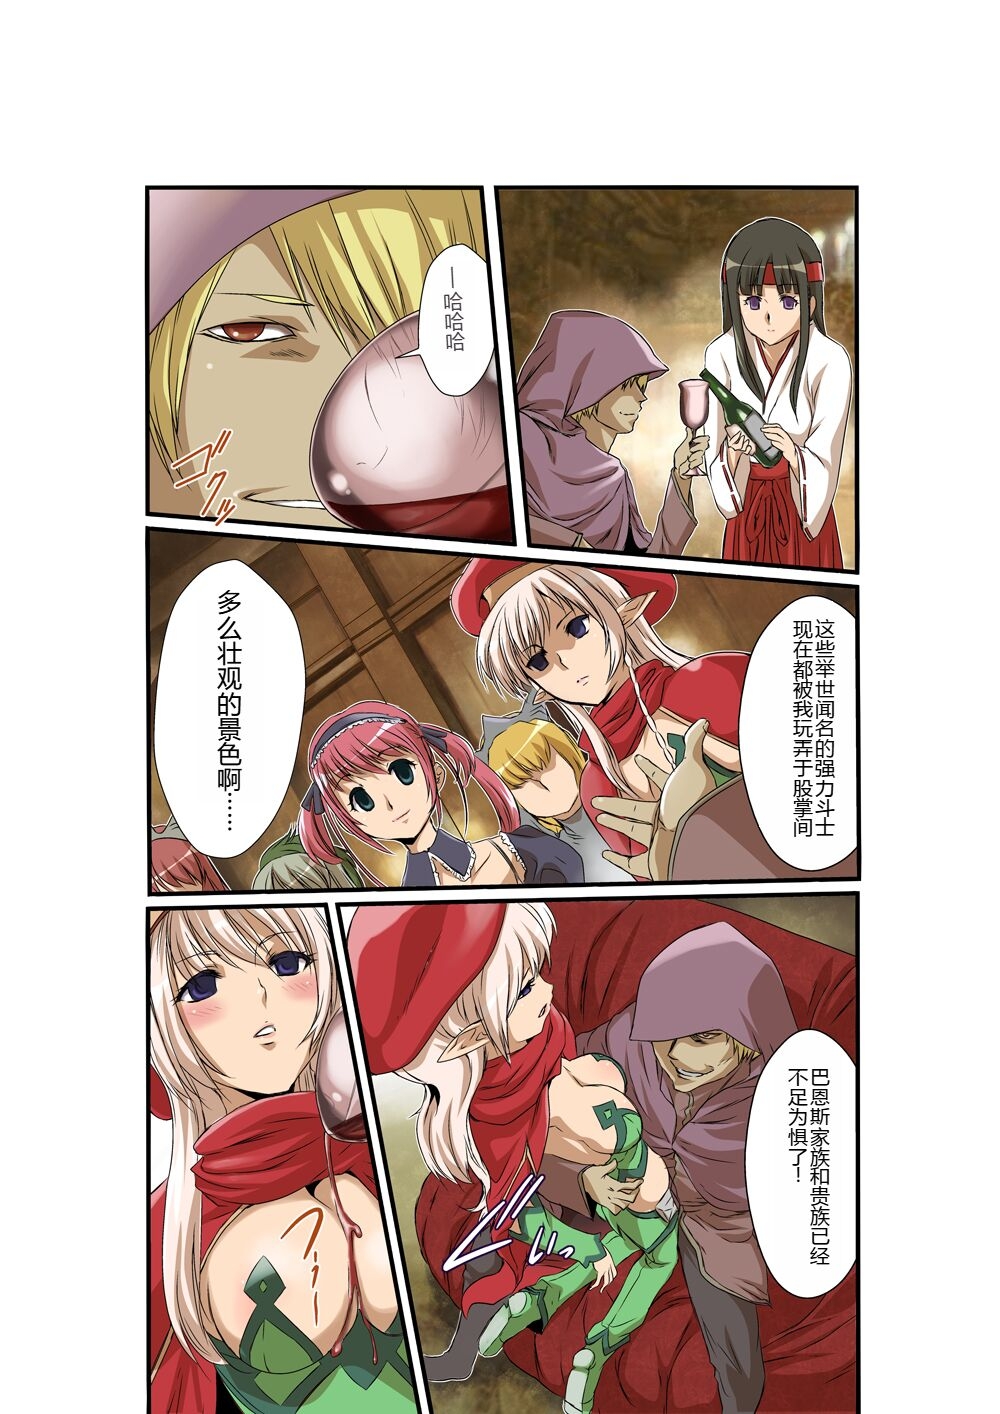 [Utsuro na Hitomi] Queen's *lade Mind-control Manga (Queen's Blade) [chinese] [lalala1234个人机翻汉化] 18